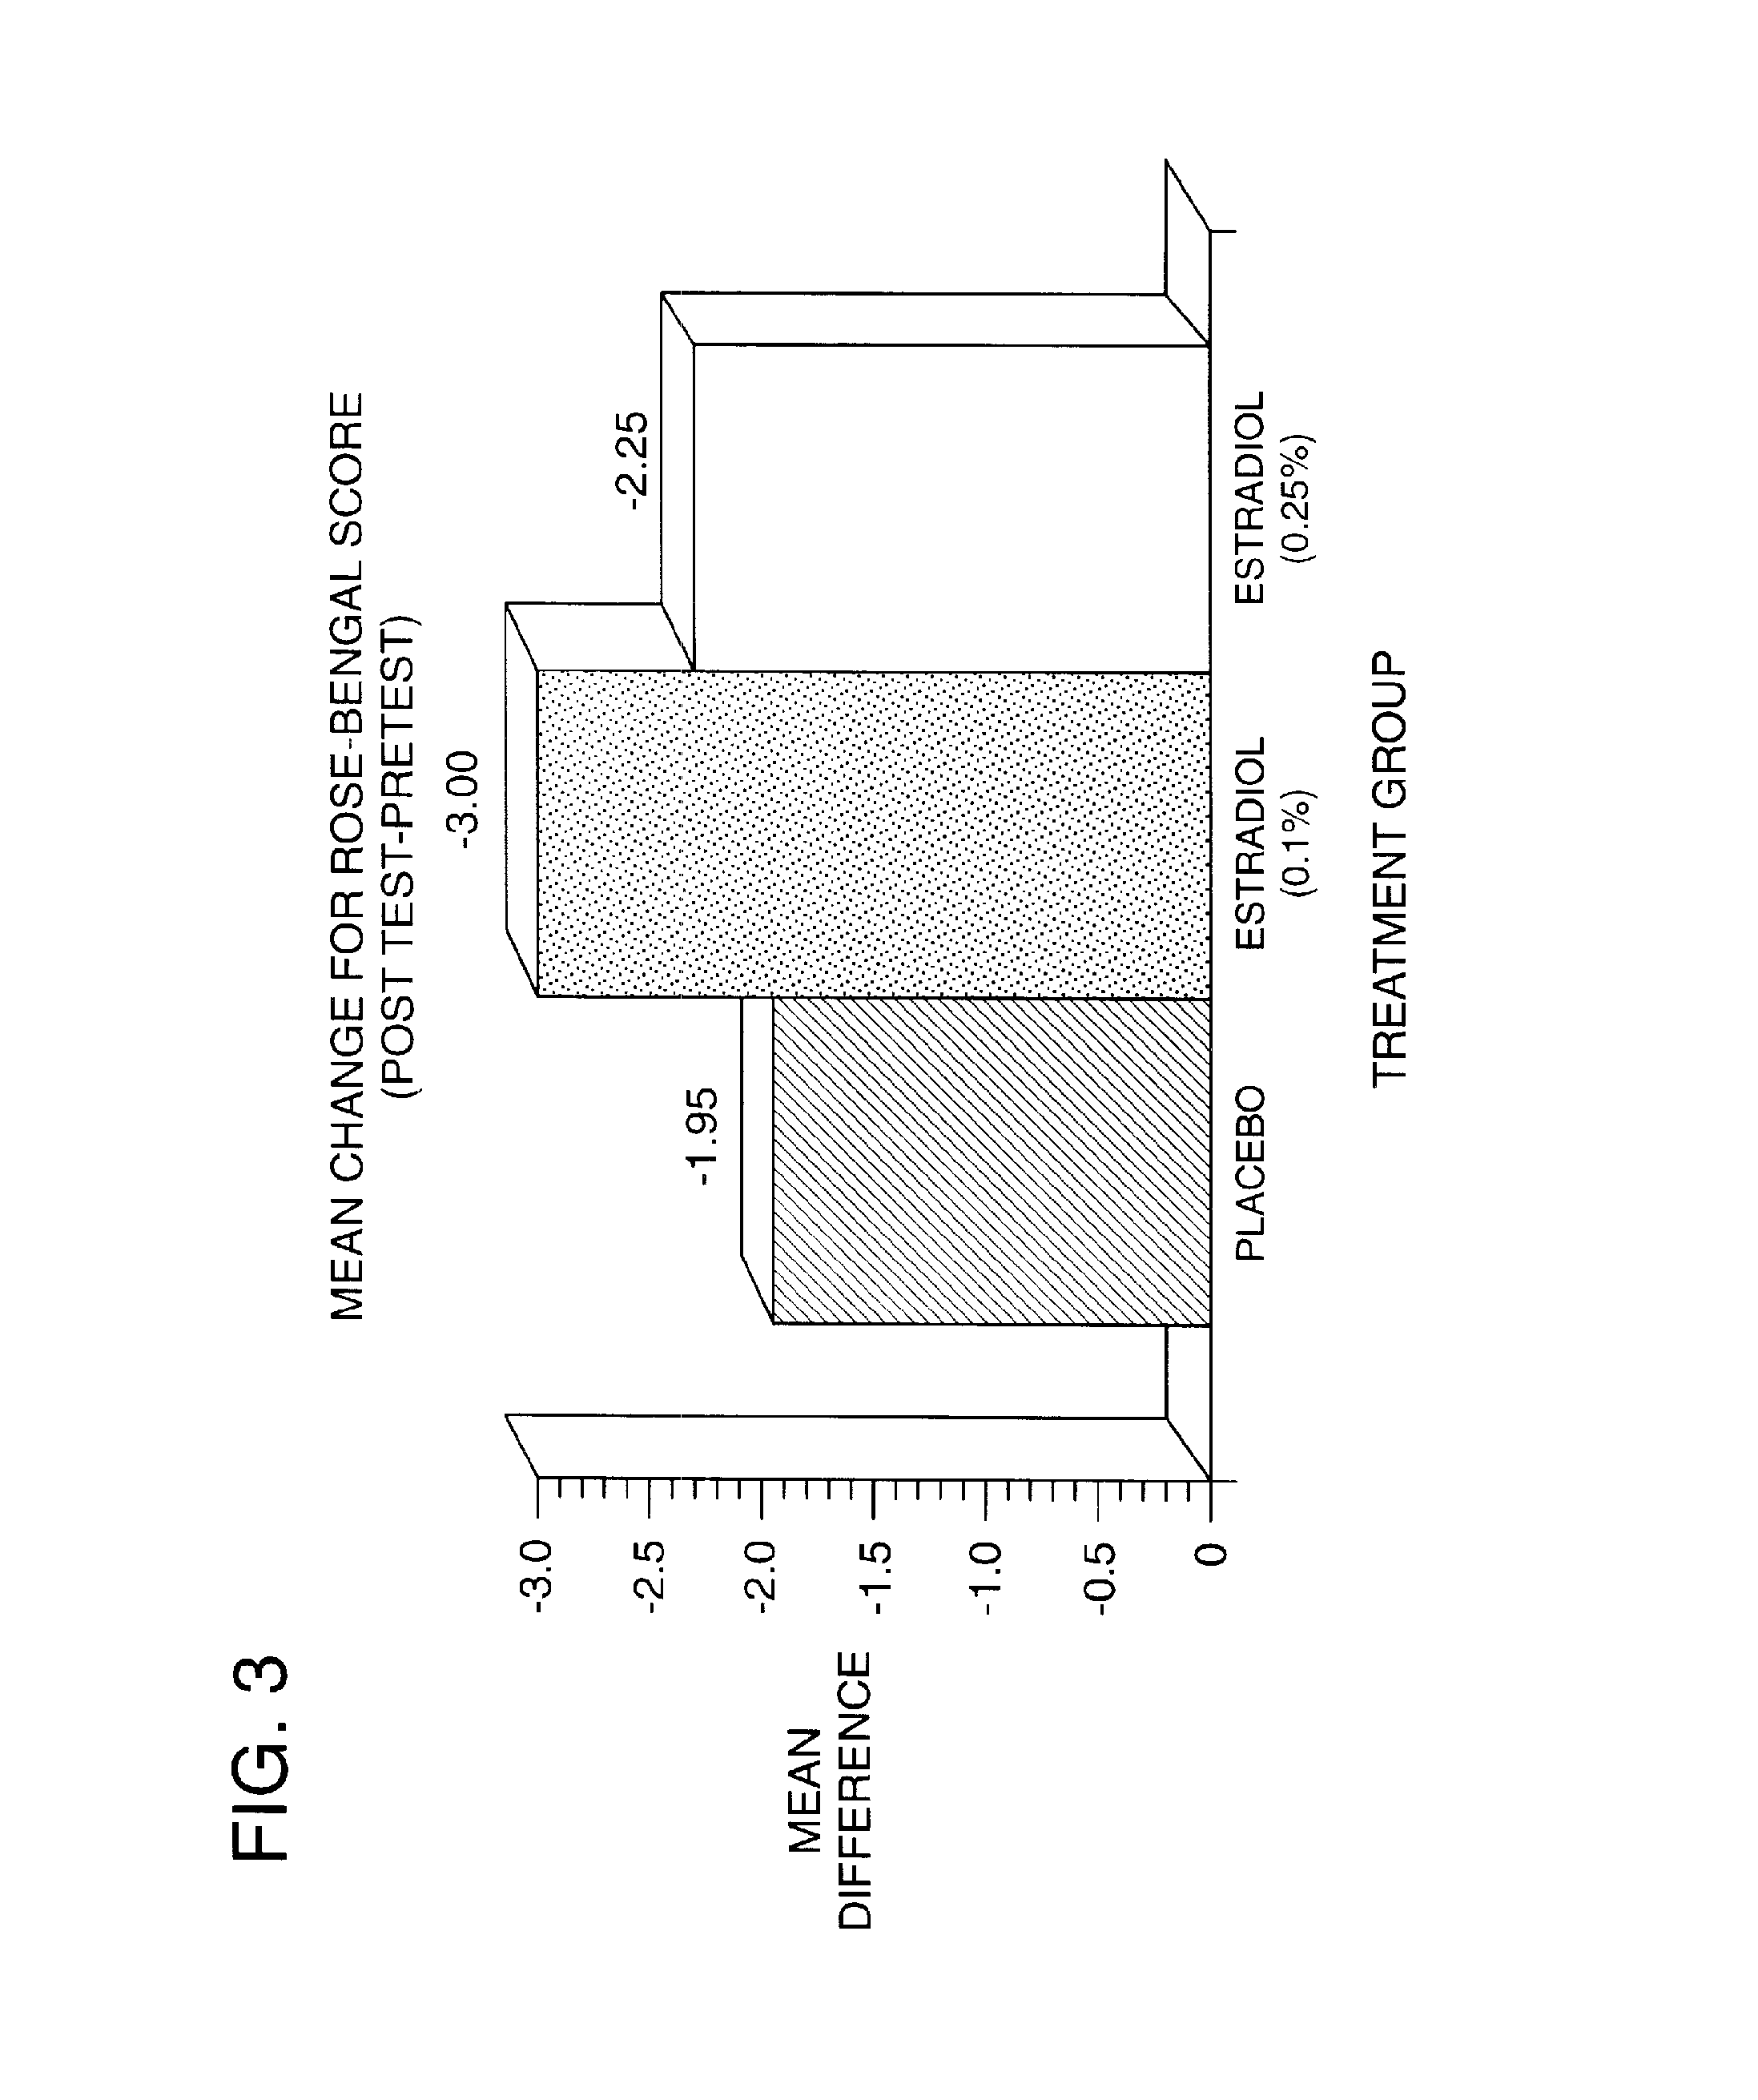 Time-release and micro-dose formulations for topical application of estrogen and estrogen analogs or other estrogen receptor modulators in the treatment of dry eye syndrome, and methods of preparation and application